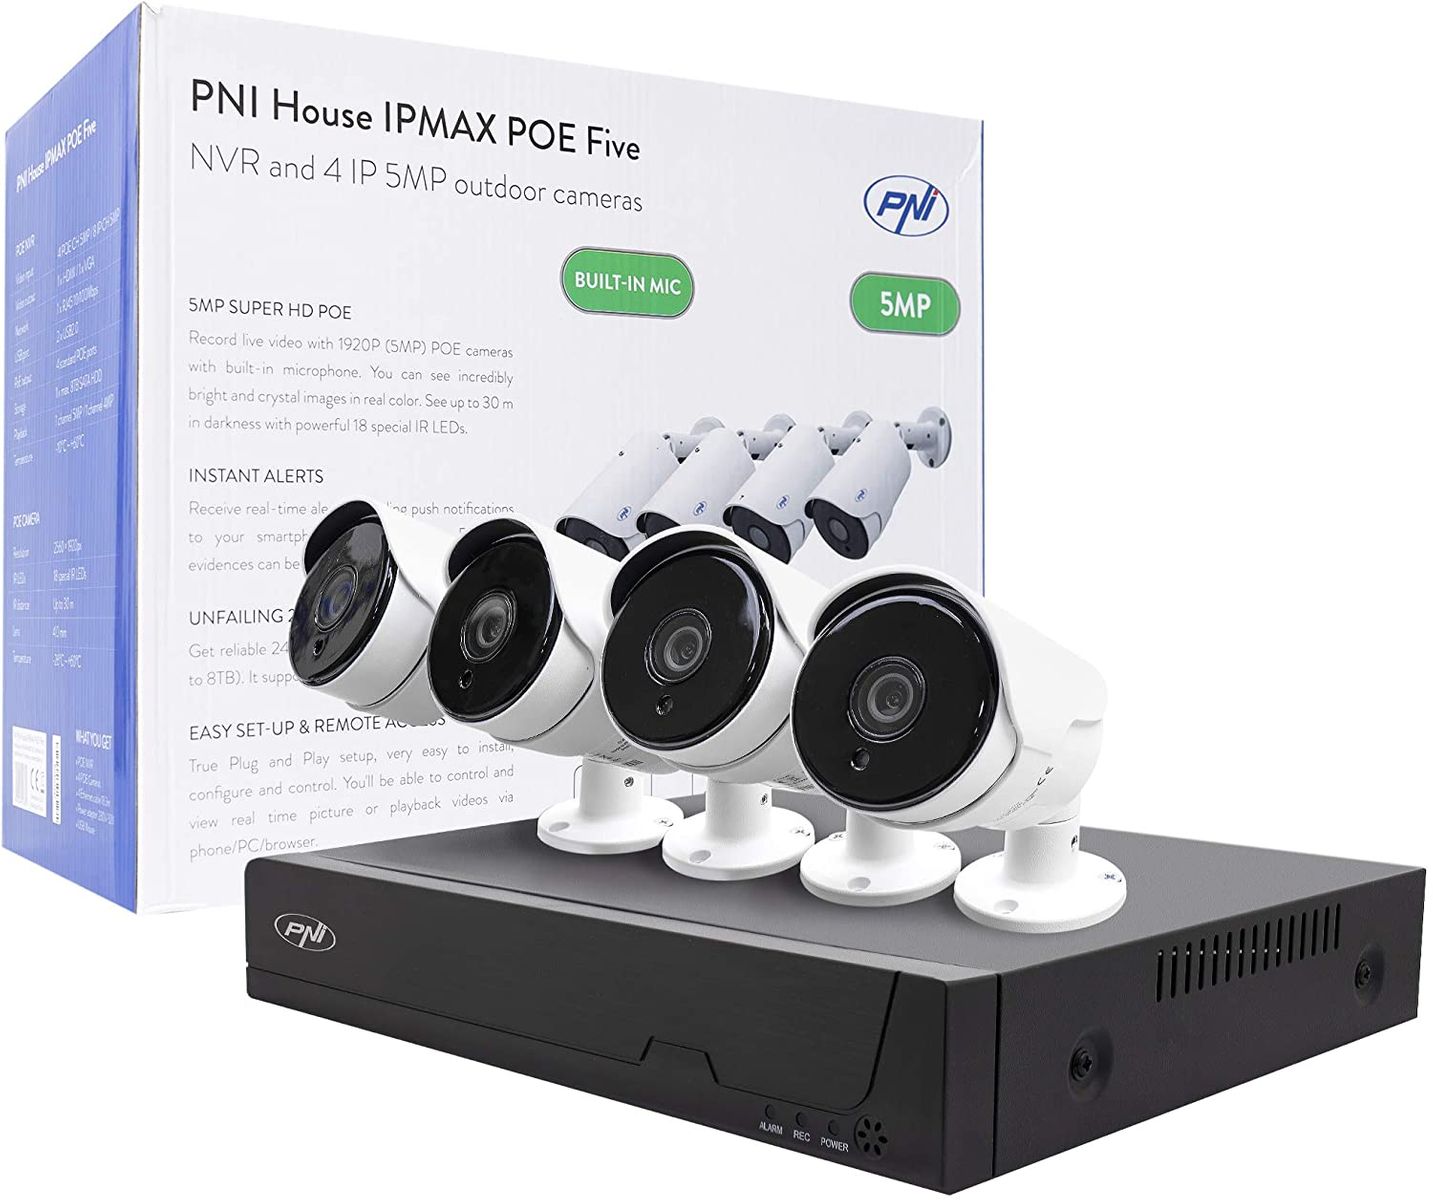 PNI House IPMAX POE Five, NVR with 4 POE ports, ONVIF and 4 cameras with IP 5MP, outdoor, Power Over Ethernet, chip detection, motion detection.